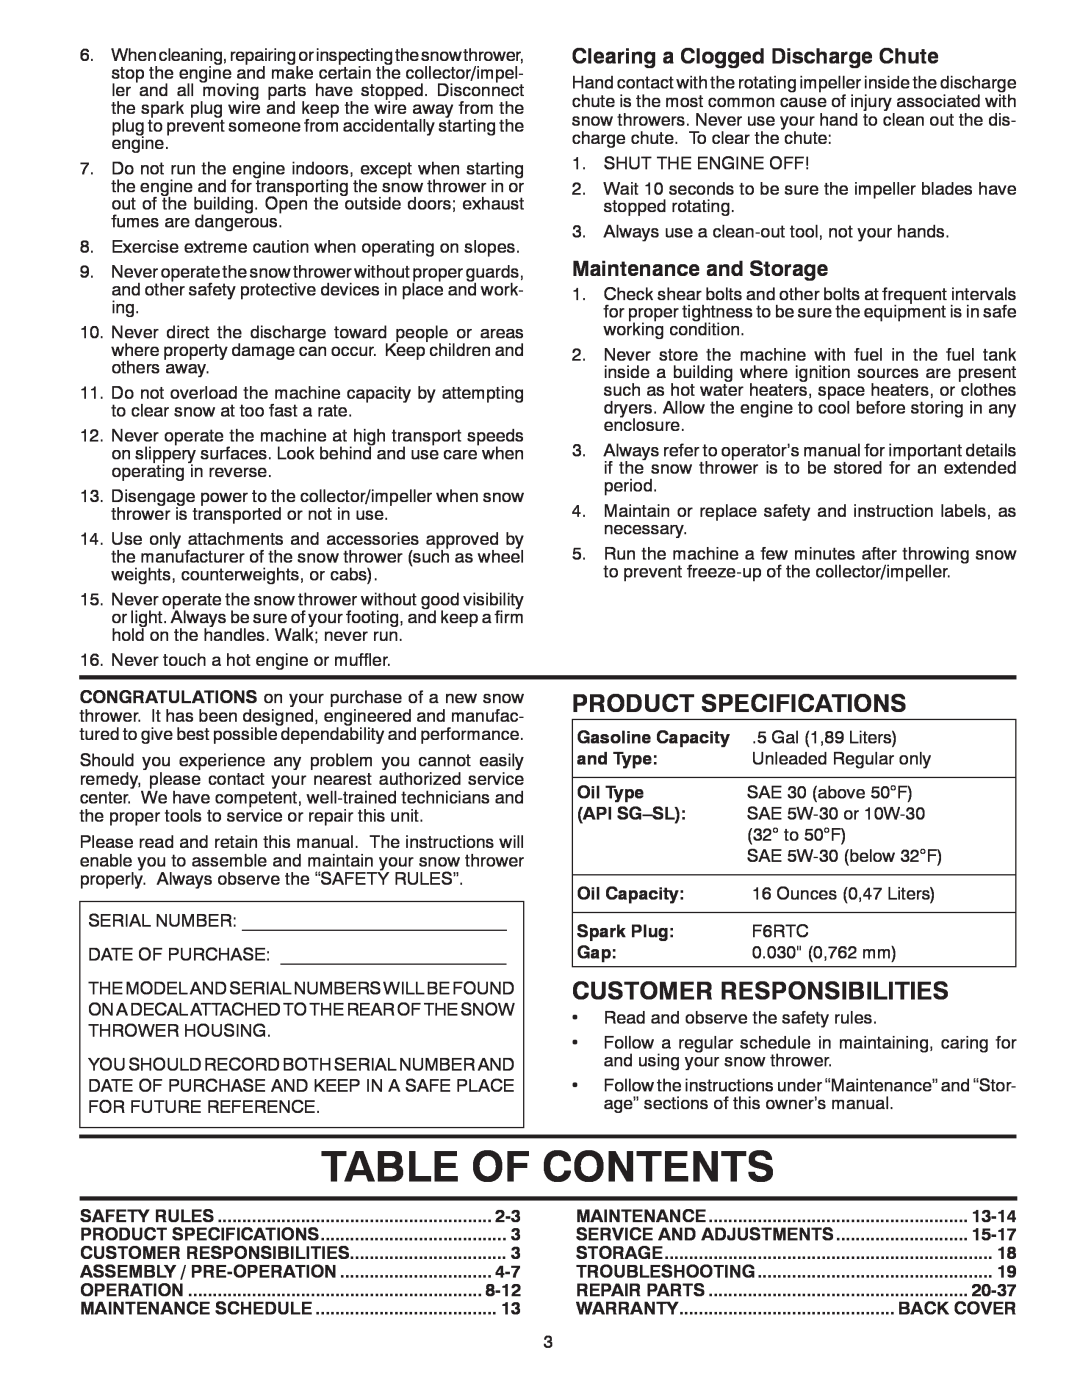 McCulloch MC12527ES Table Of Contents, Product Specifications, Customer Responsibilities, Maintenance and Storage, 8-12 